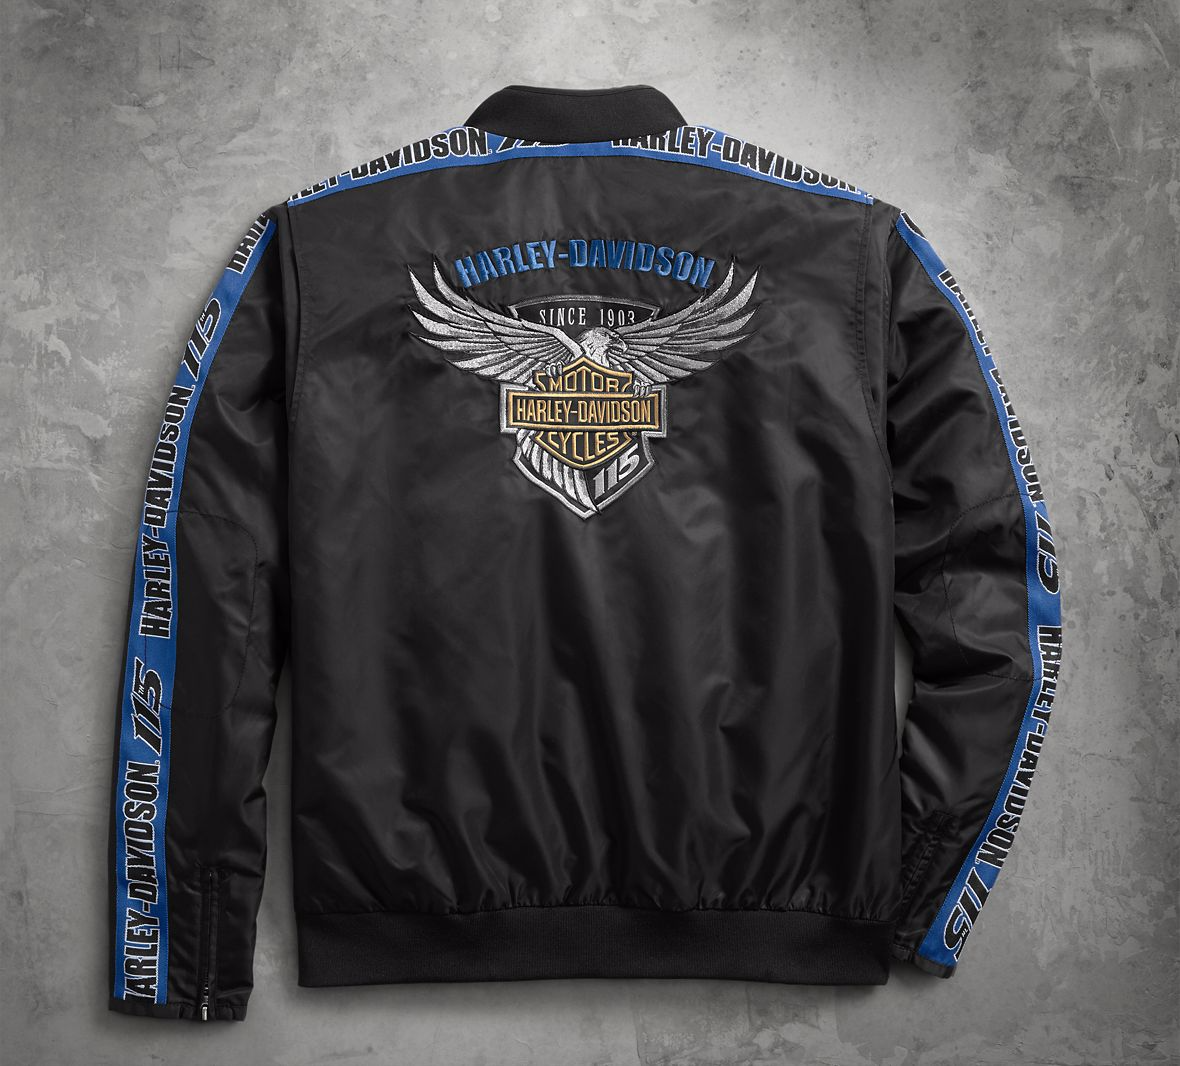 Harley Davidson Celebrates 115th Anniversary with Insulating Clothing